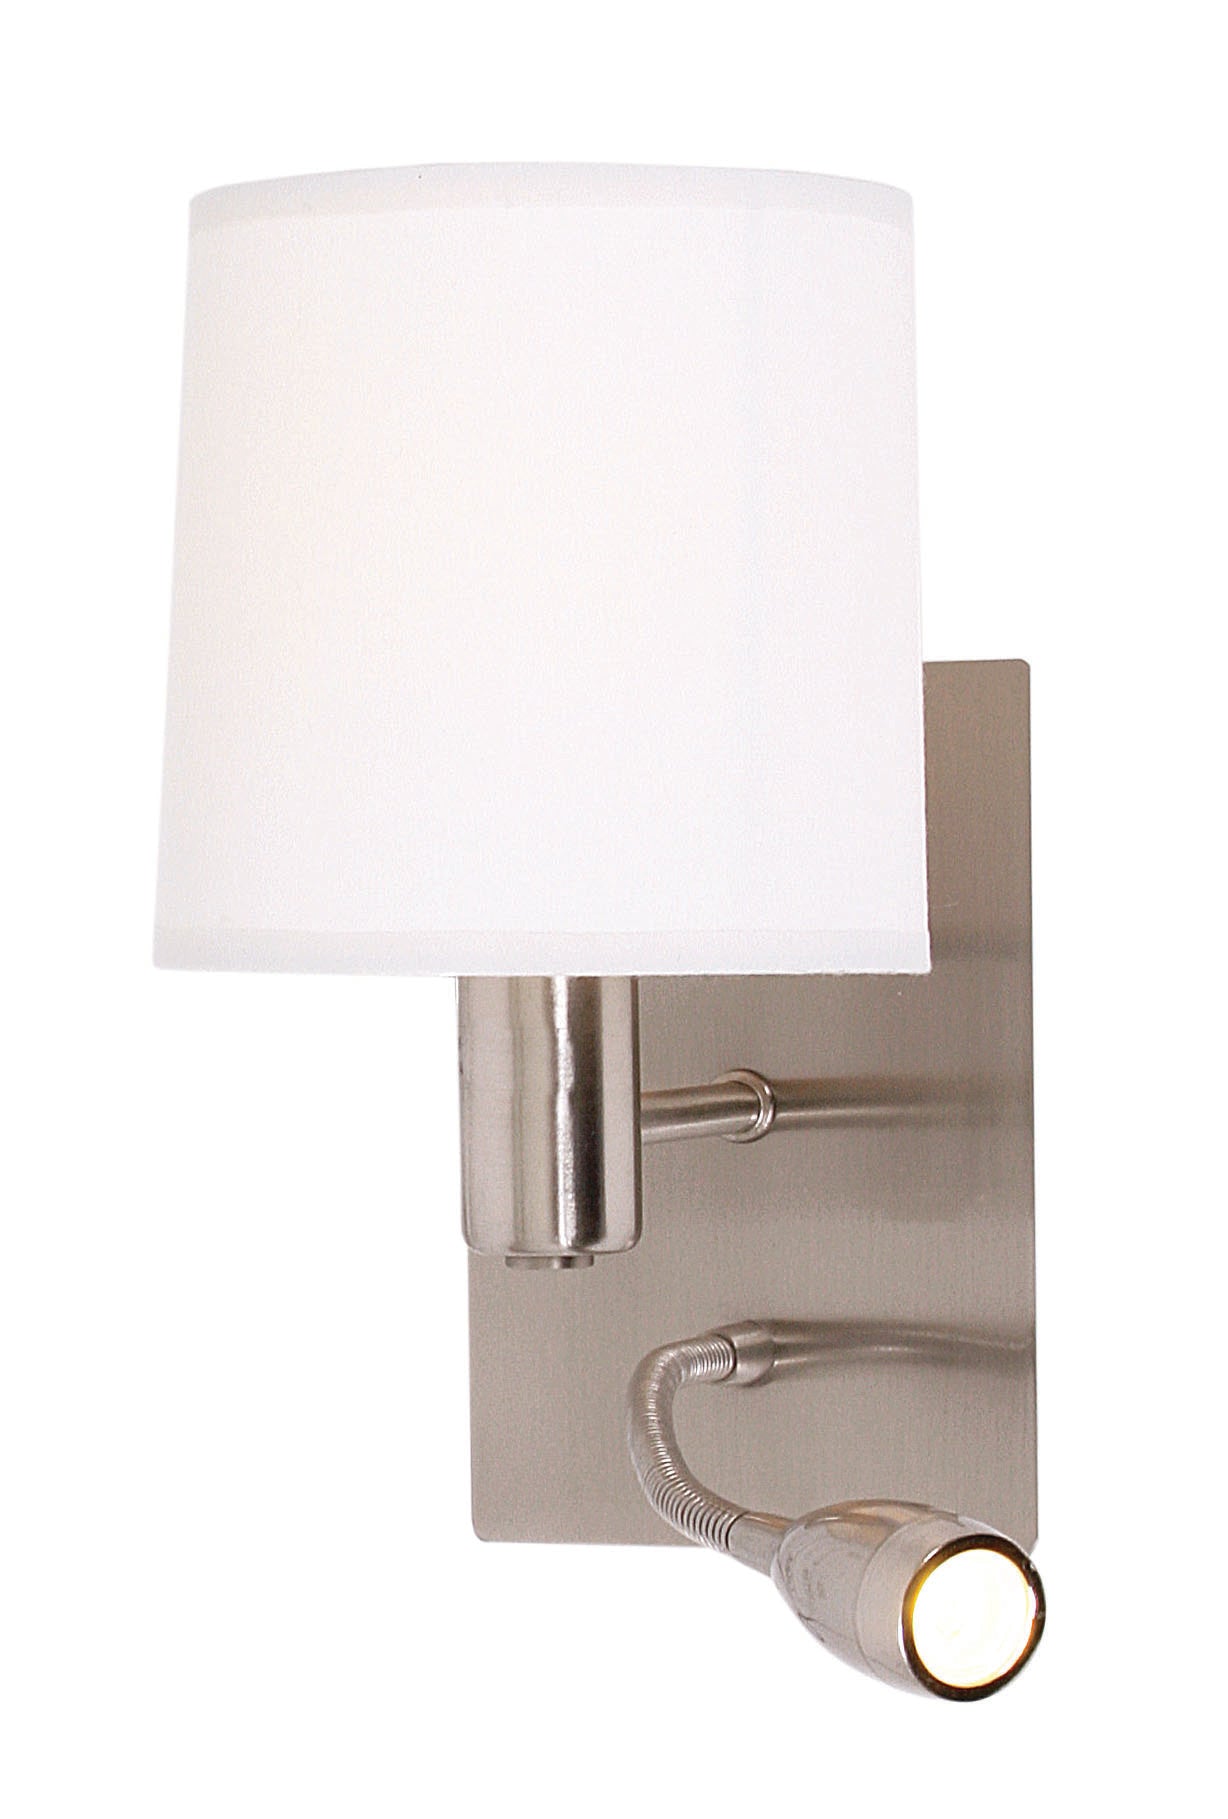 Eden Satin Chrome Wall & Reading Light (Launch Special) - Future Light - LED Lights South Africa